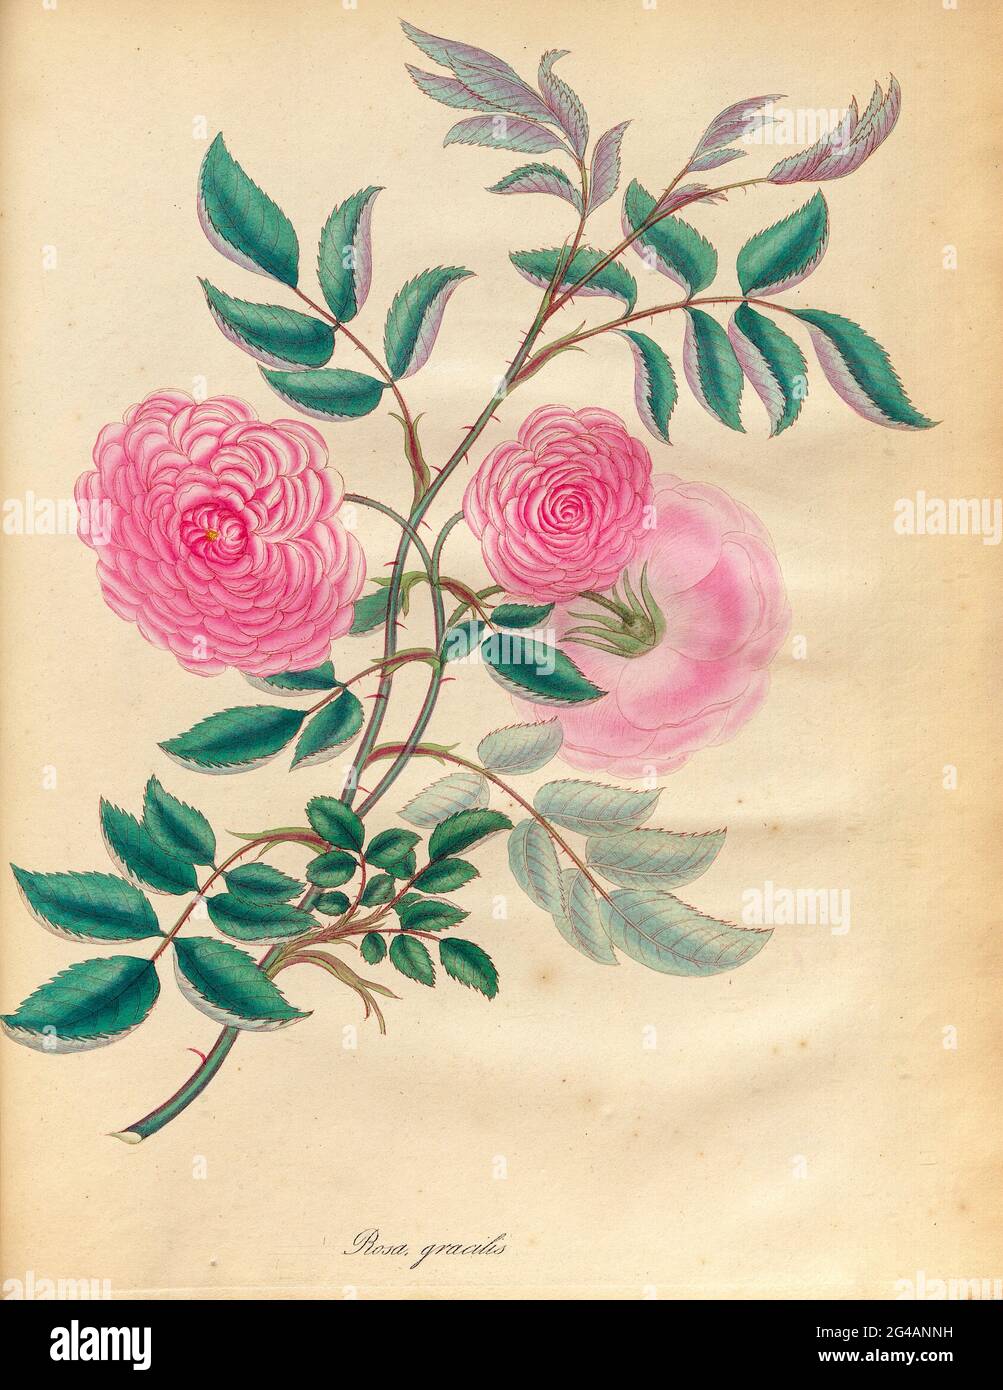 ROSA gracilis, Slender Rose From the book Roses, or, A monograph of the genus Rosa : containing coloured figures of all the known species and beautiful varieties, drawn, engraved, described, and coloured, from living plants. by Andrews, Henry Charles, Published in London : printed by R. Taylor and Co. ; 1805. Stock Photo